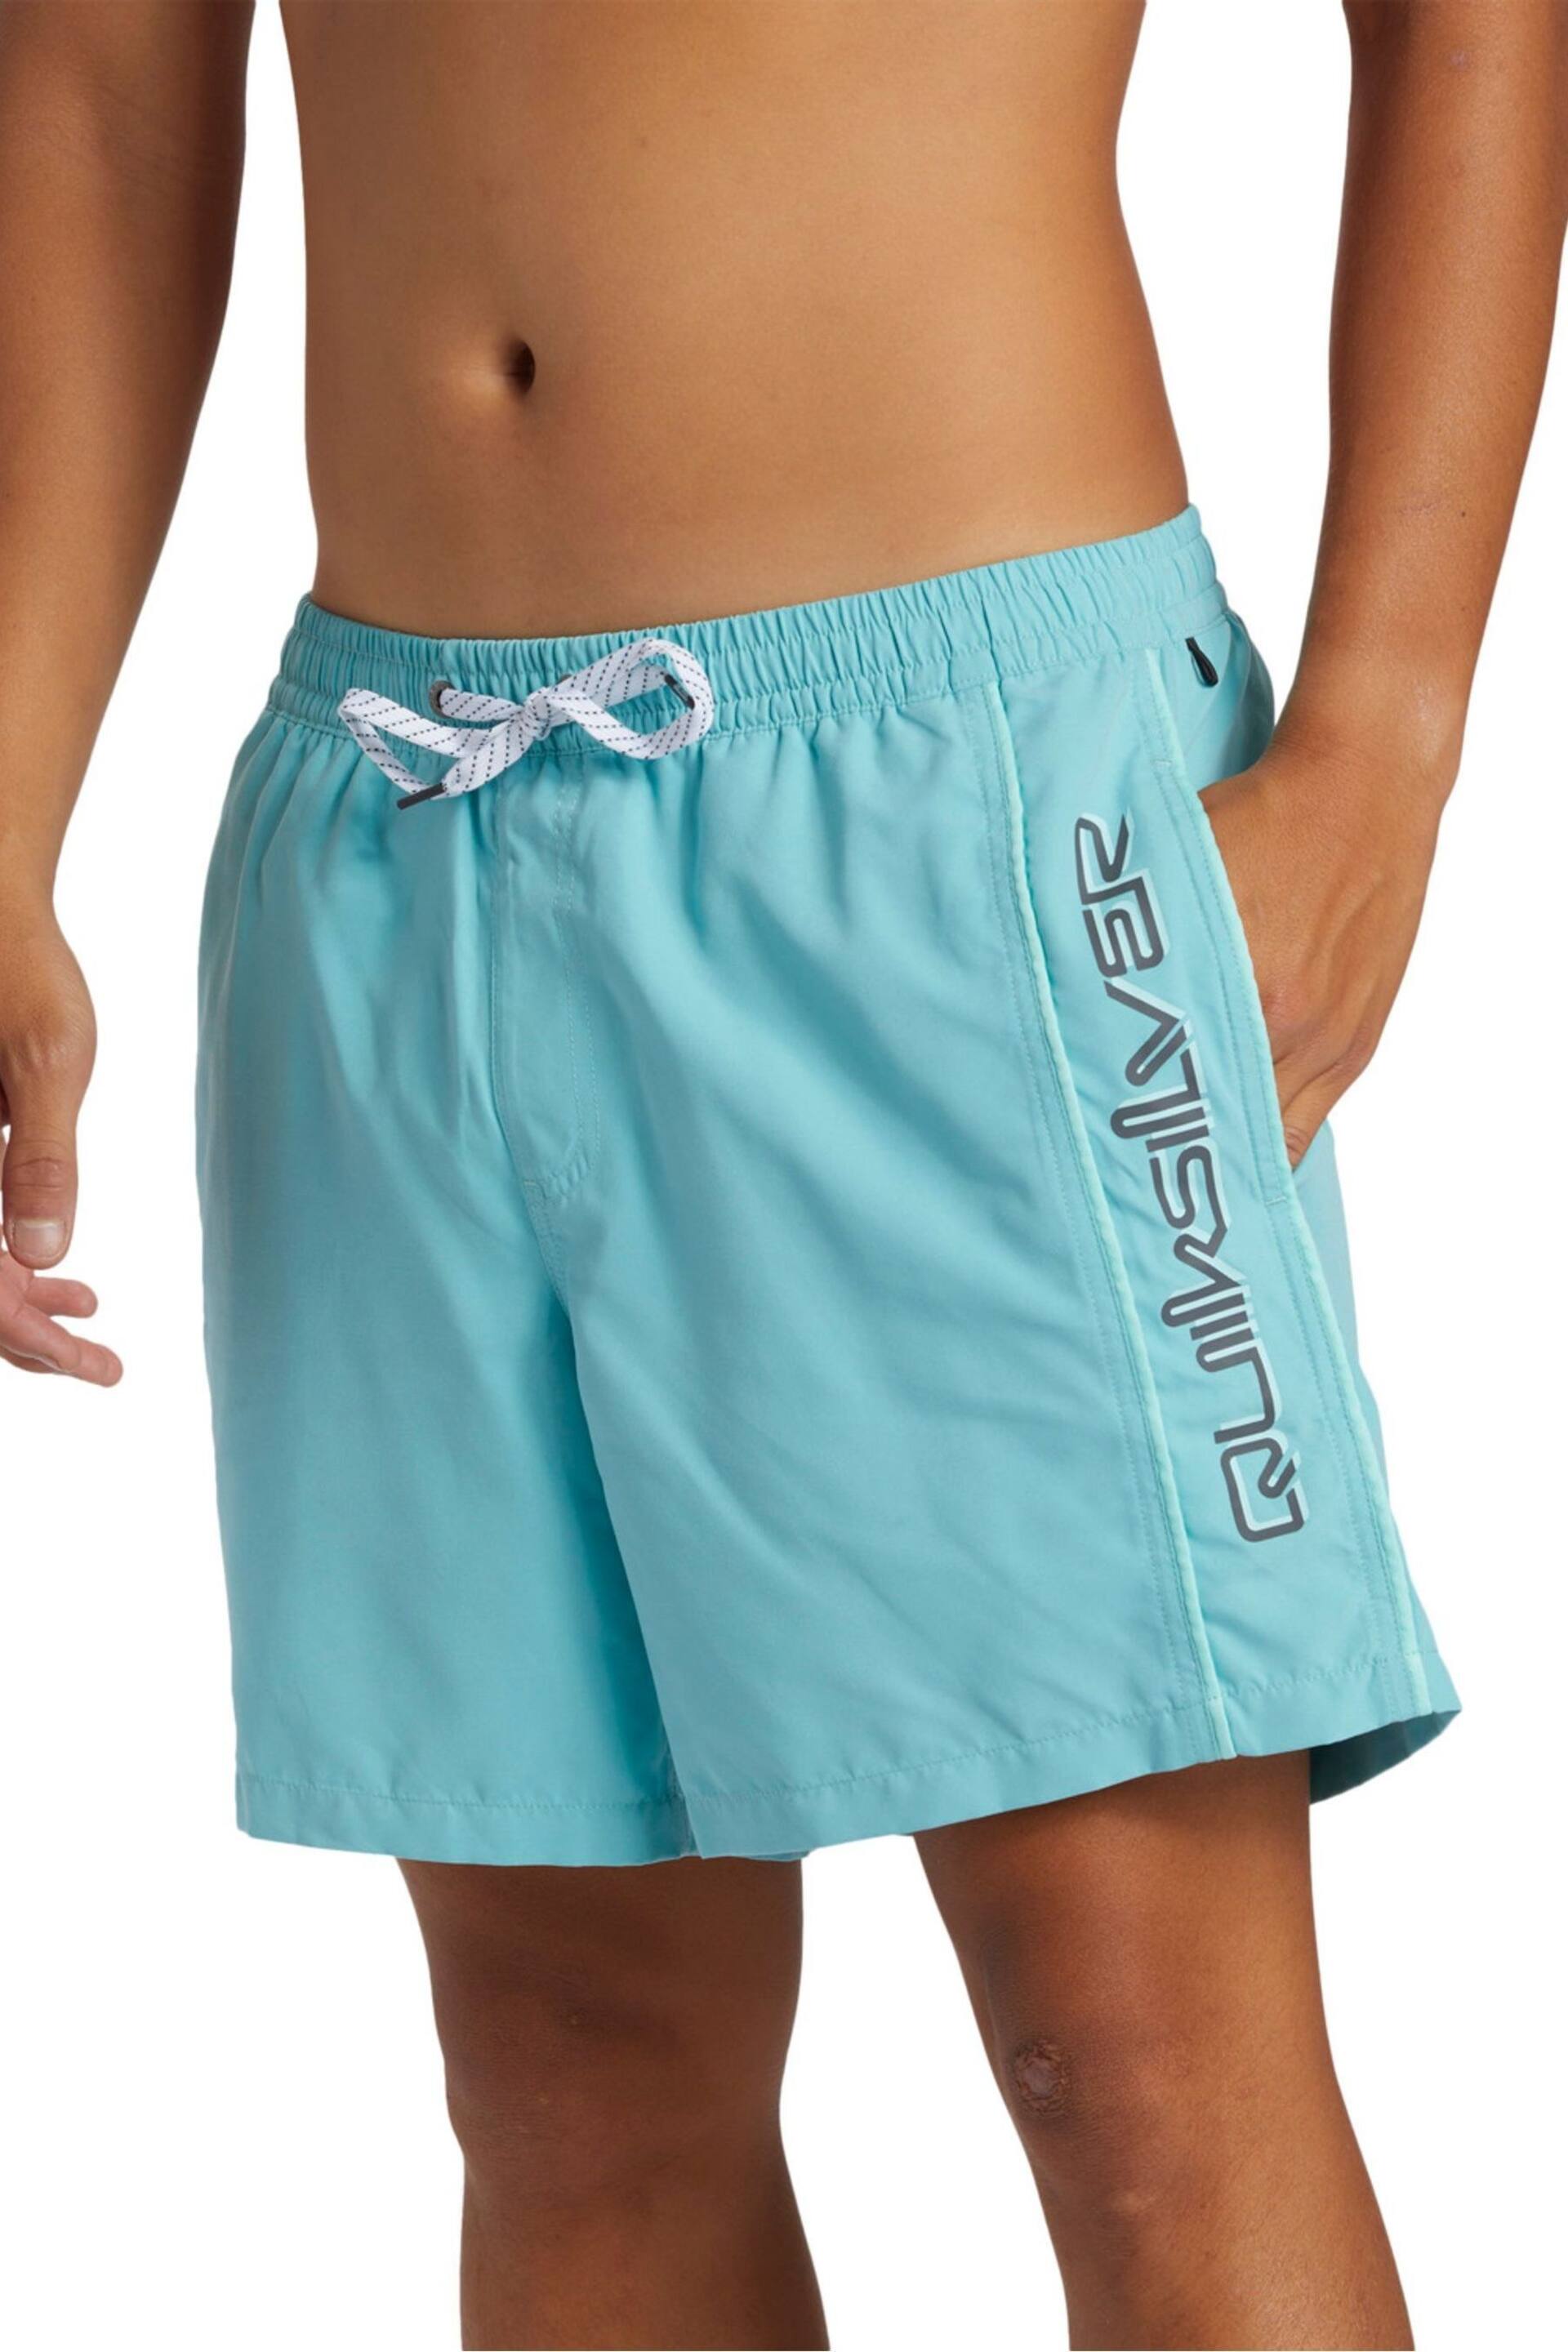 Quiksilver Blue Logo Volley Shorts - Image 4 of 7